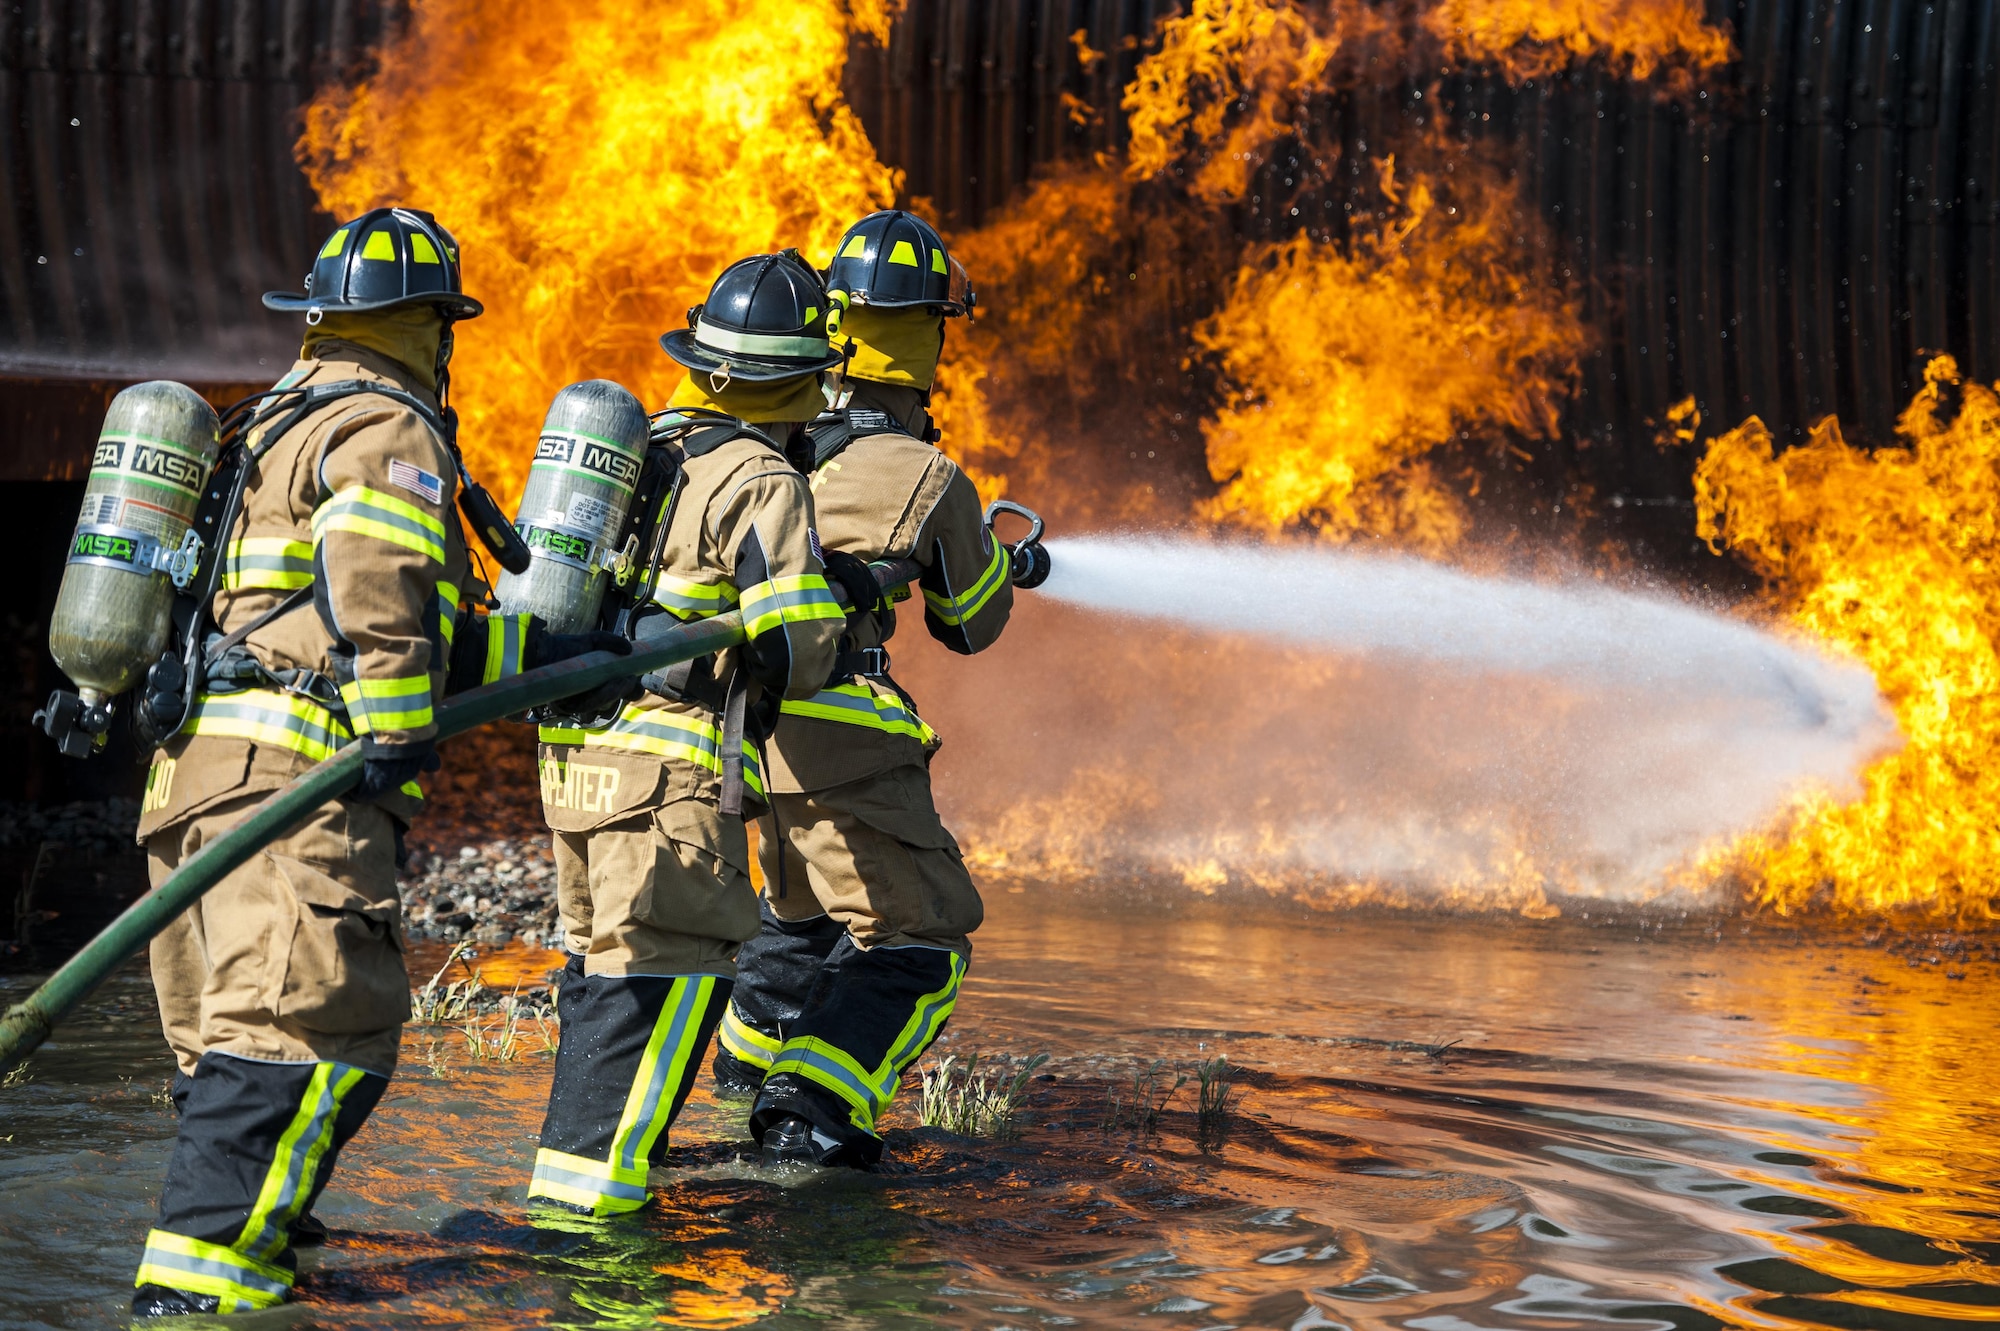 Firefighters from the 23d Civil Engineer Squadron and the Valdosta Fire Department put out an aircraft fire during aircraft live fire training, April 27, 2016, at Moody Air Force Base, Ga. Airmen extinguished a controlled propane fire, in order to simulate a jet fuel fire in an aircraft crash. (U.S. Air Force photo by Airman 1st Class Lauren M. Hunter/Released)